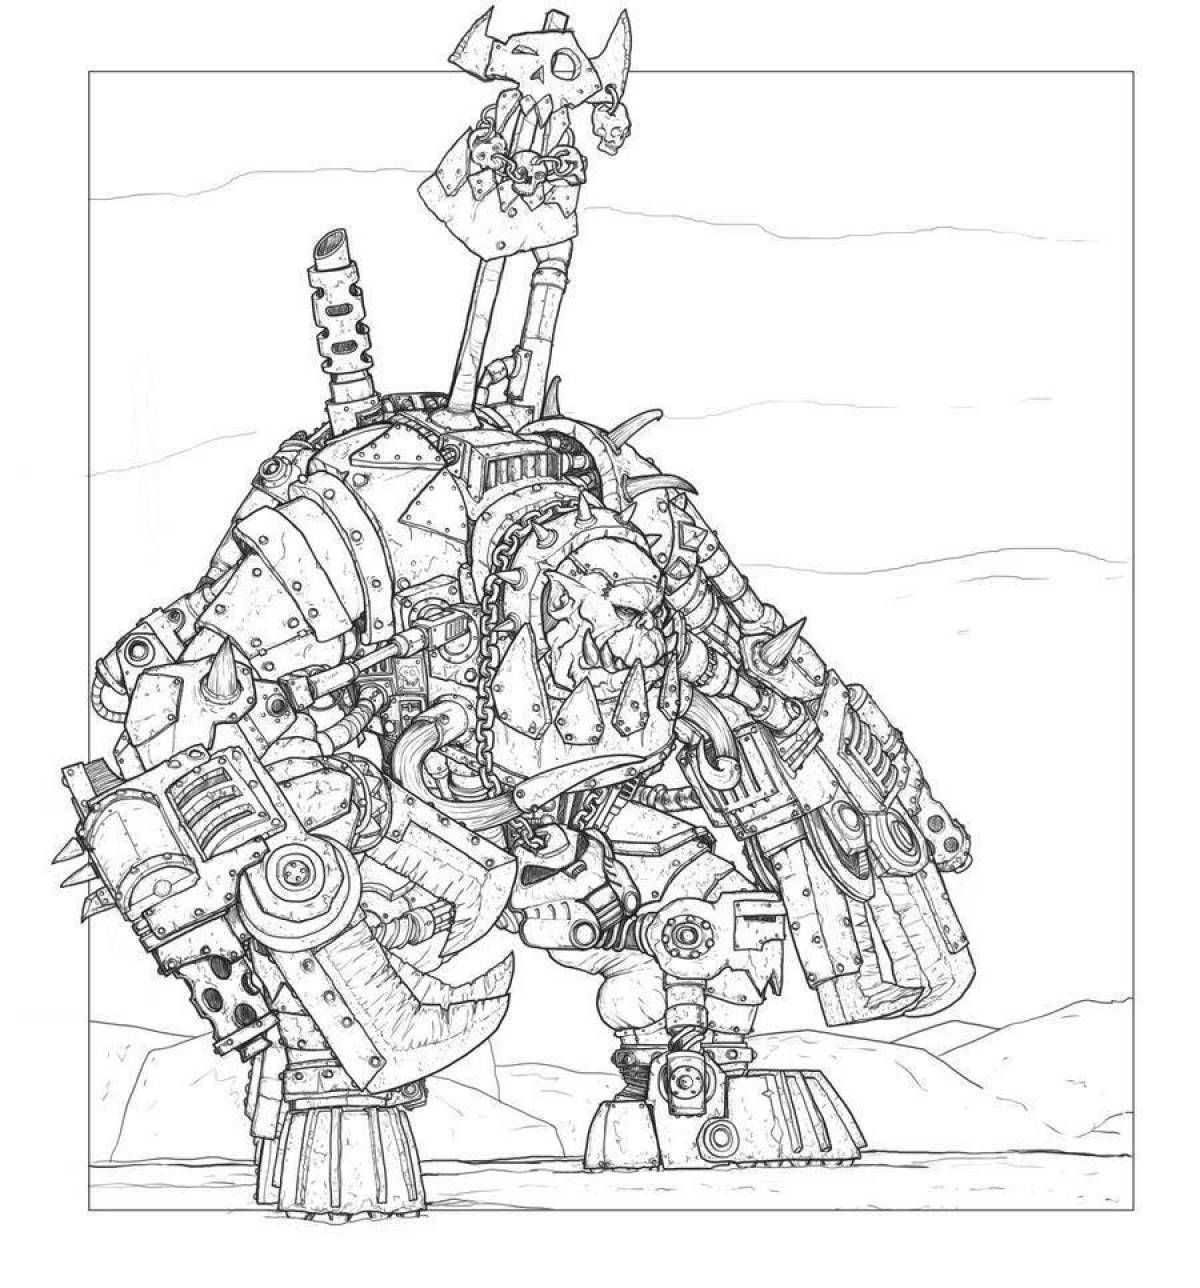 Immaculate warhammer 40000 coloring